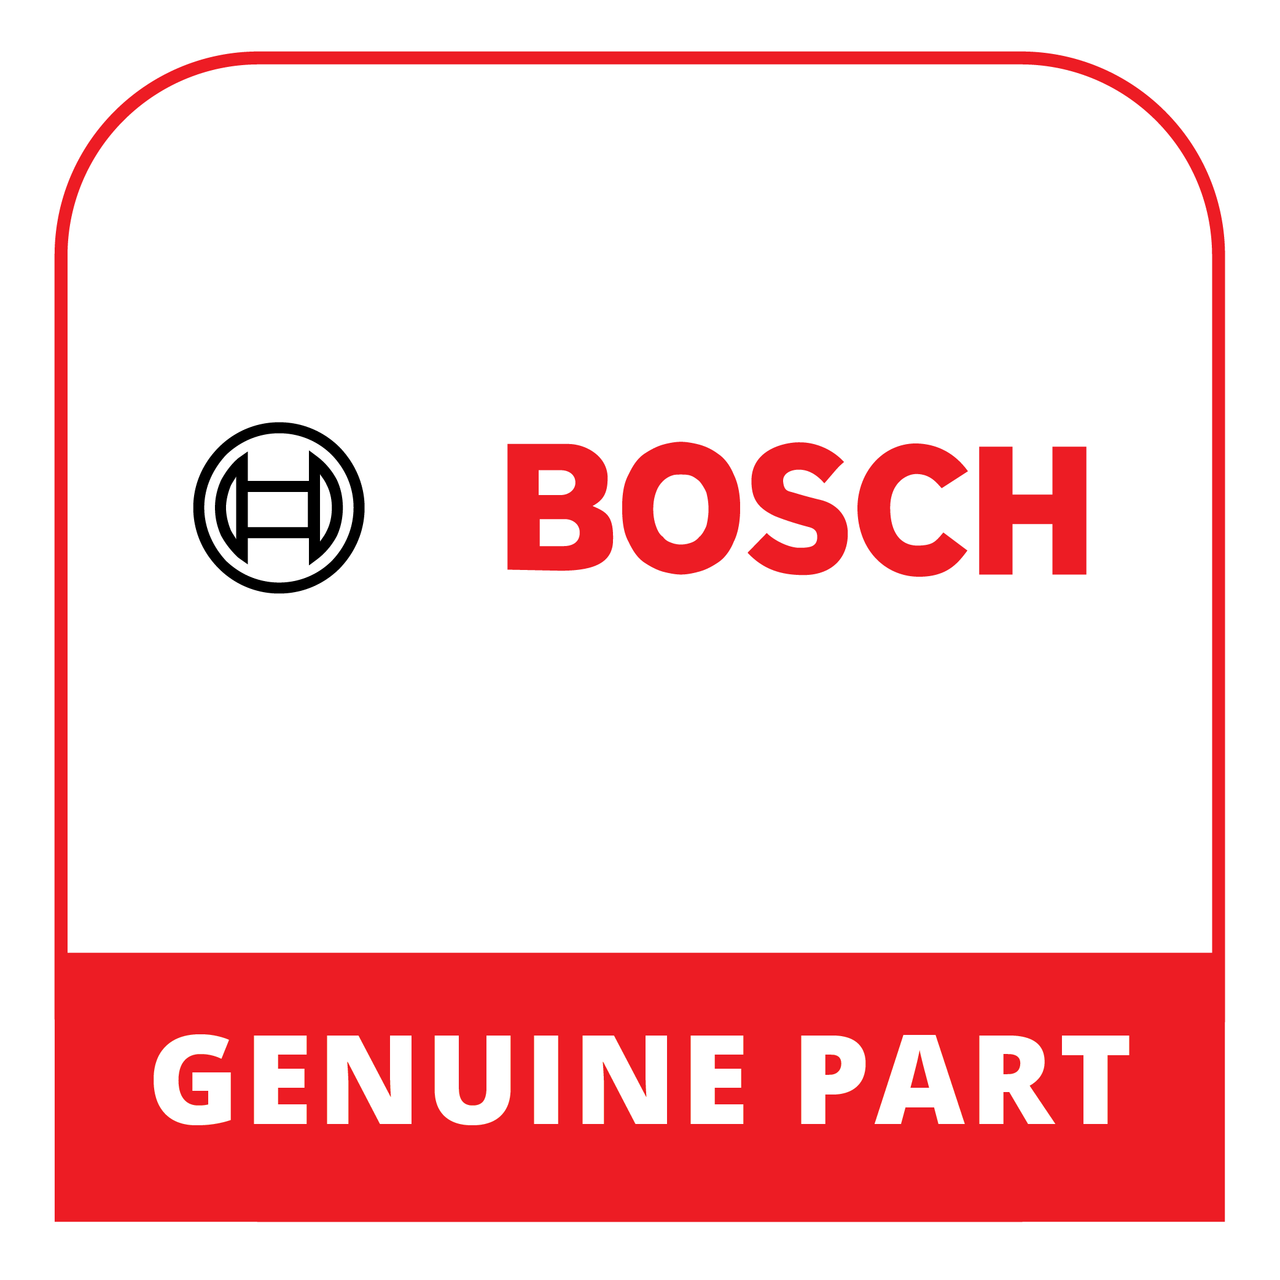 Bosch (Thermador) 23002090 - Cover Sheet - Genuine Bosch (Thermador) Part